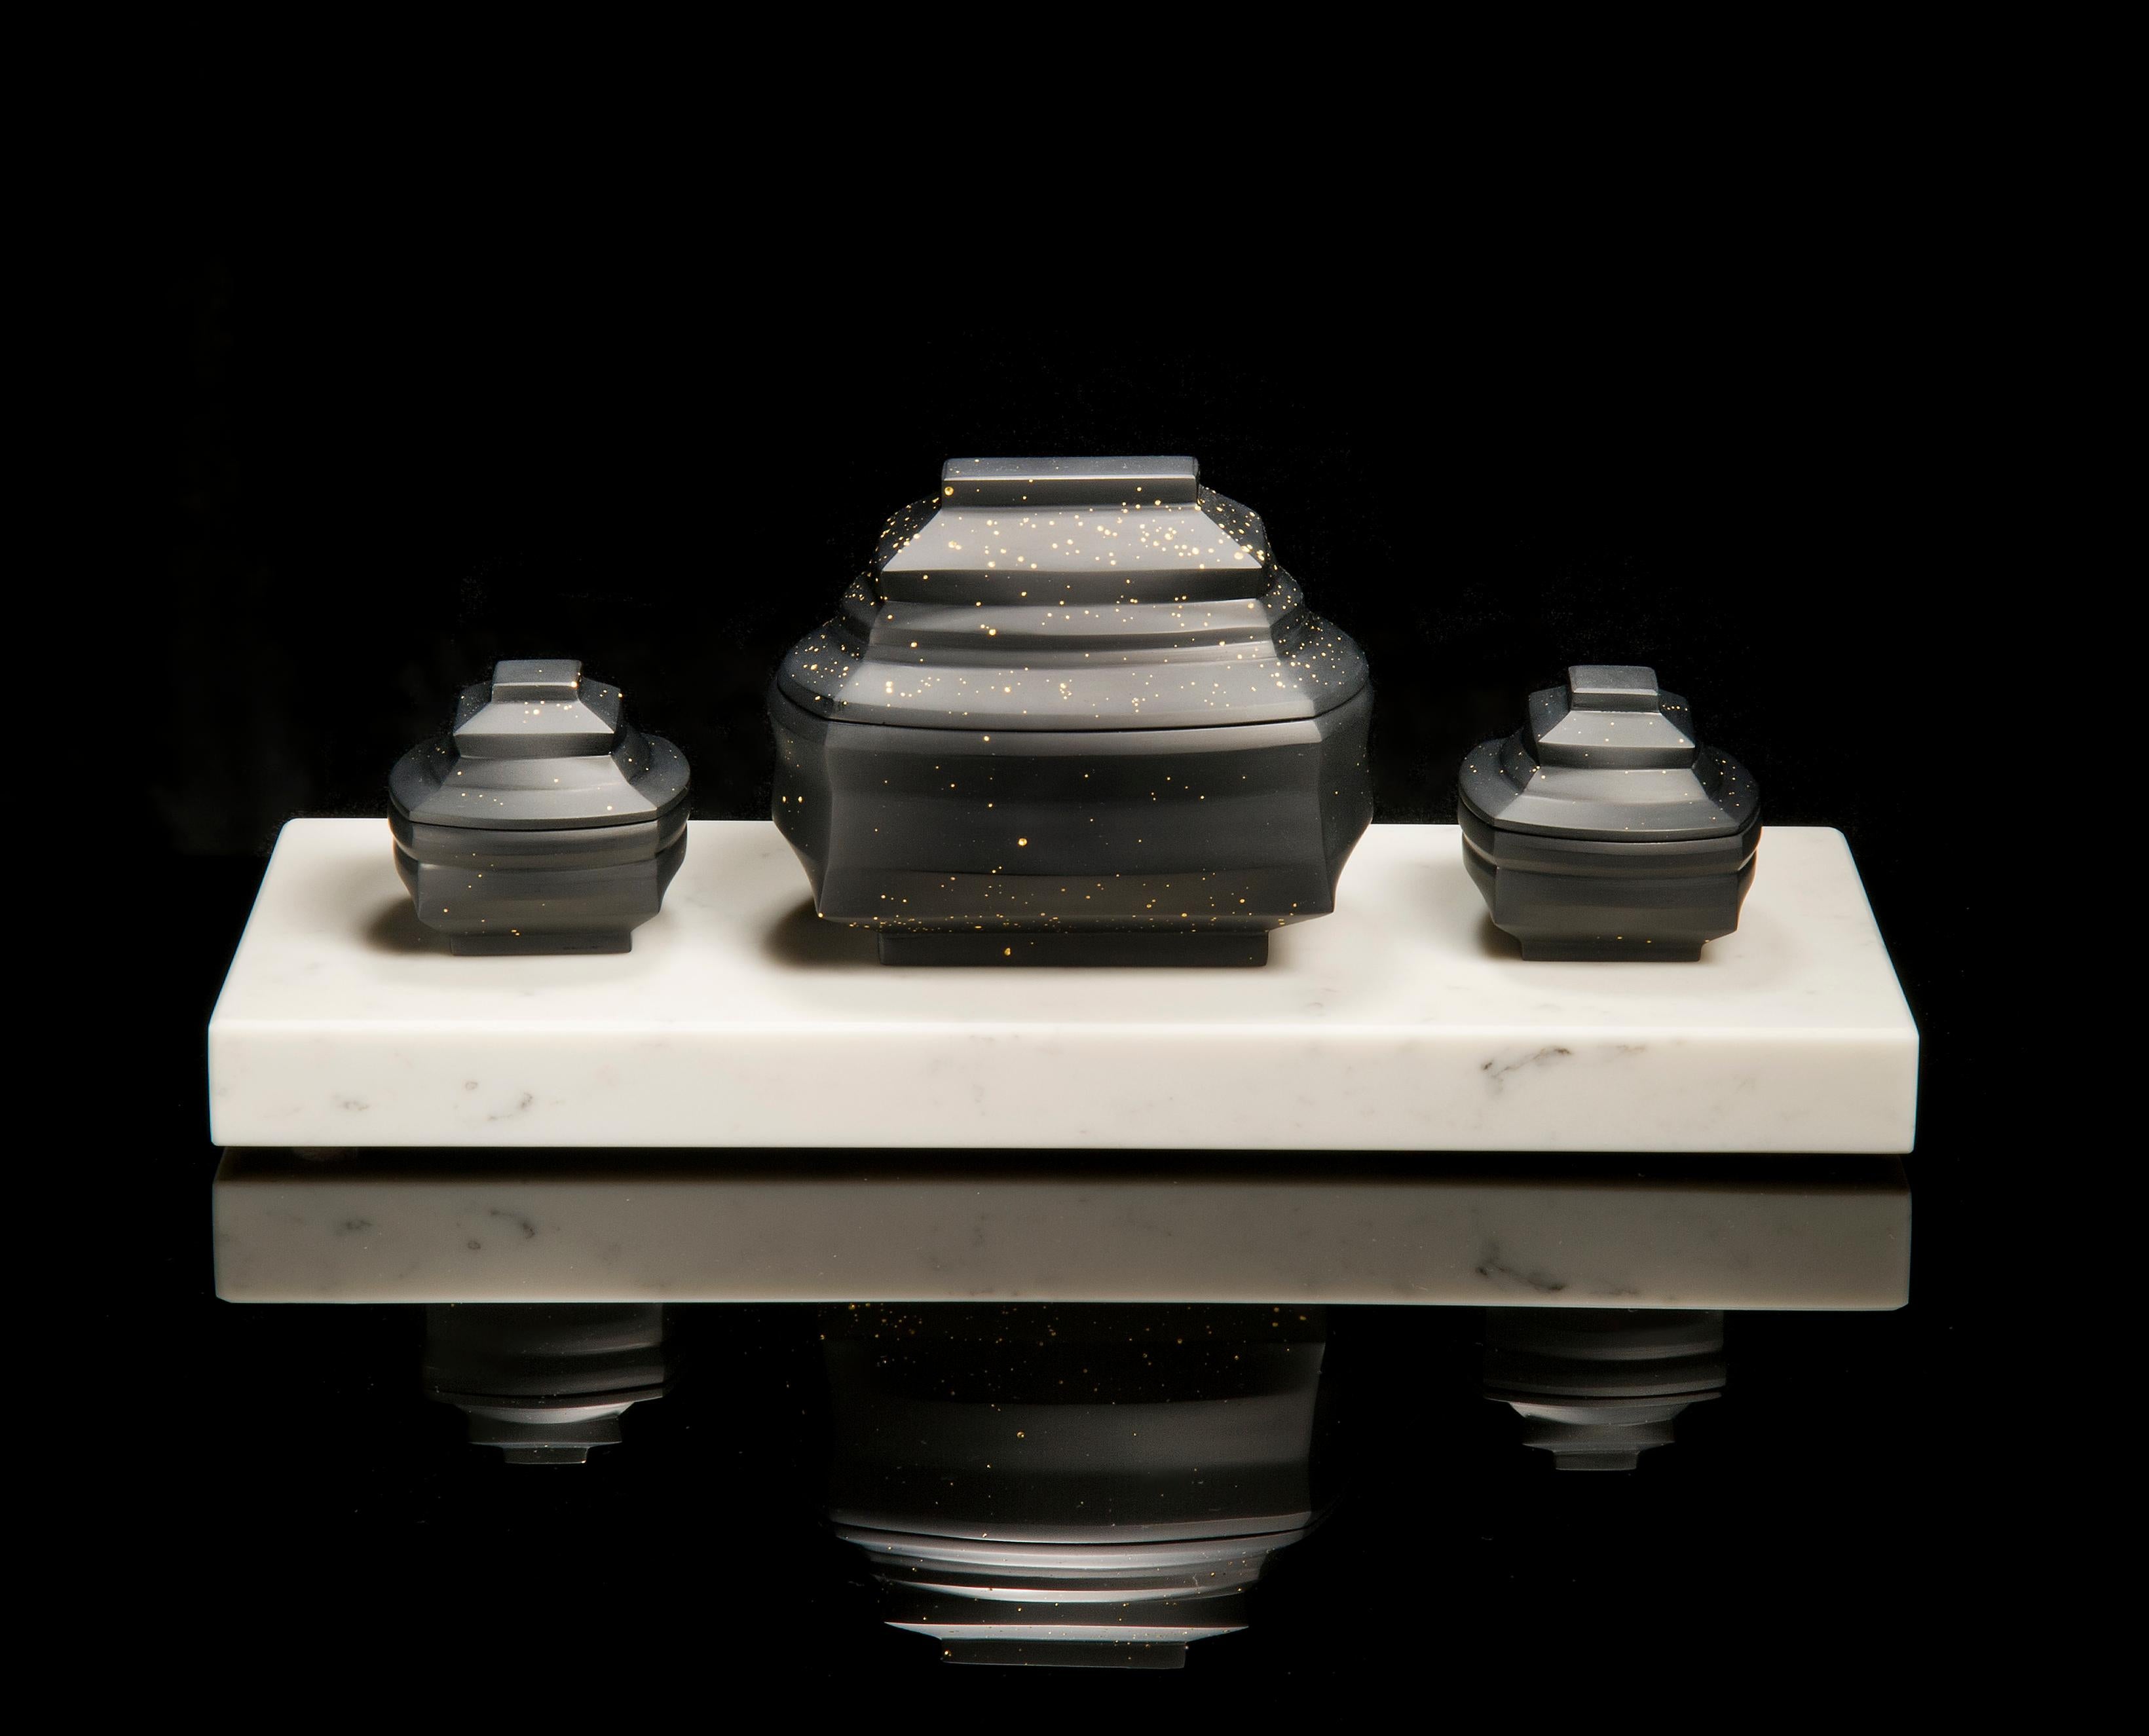 Daam Dah Triptych, a Unique Artglass Set of Three Lidded Boxes by Choi Keeryong 1